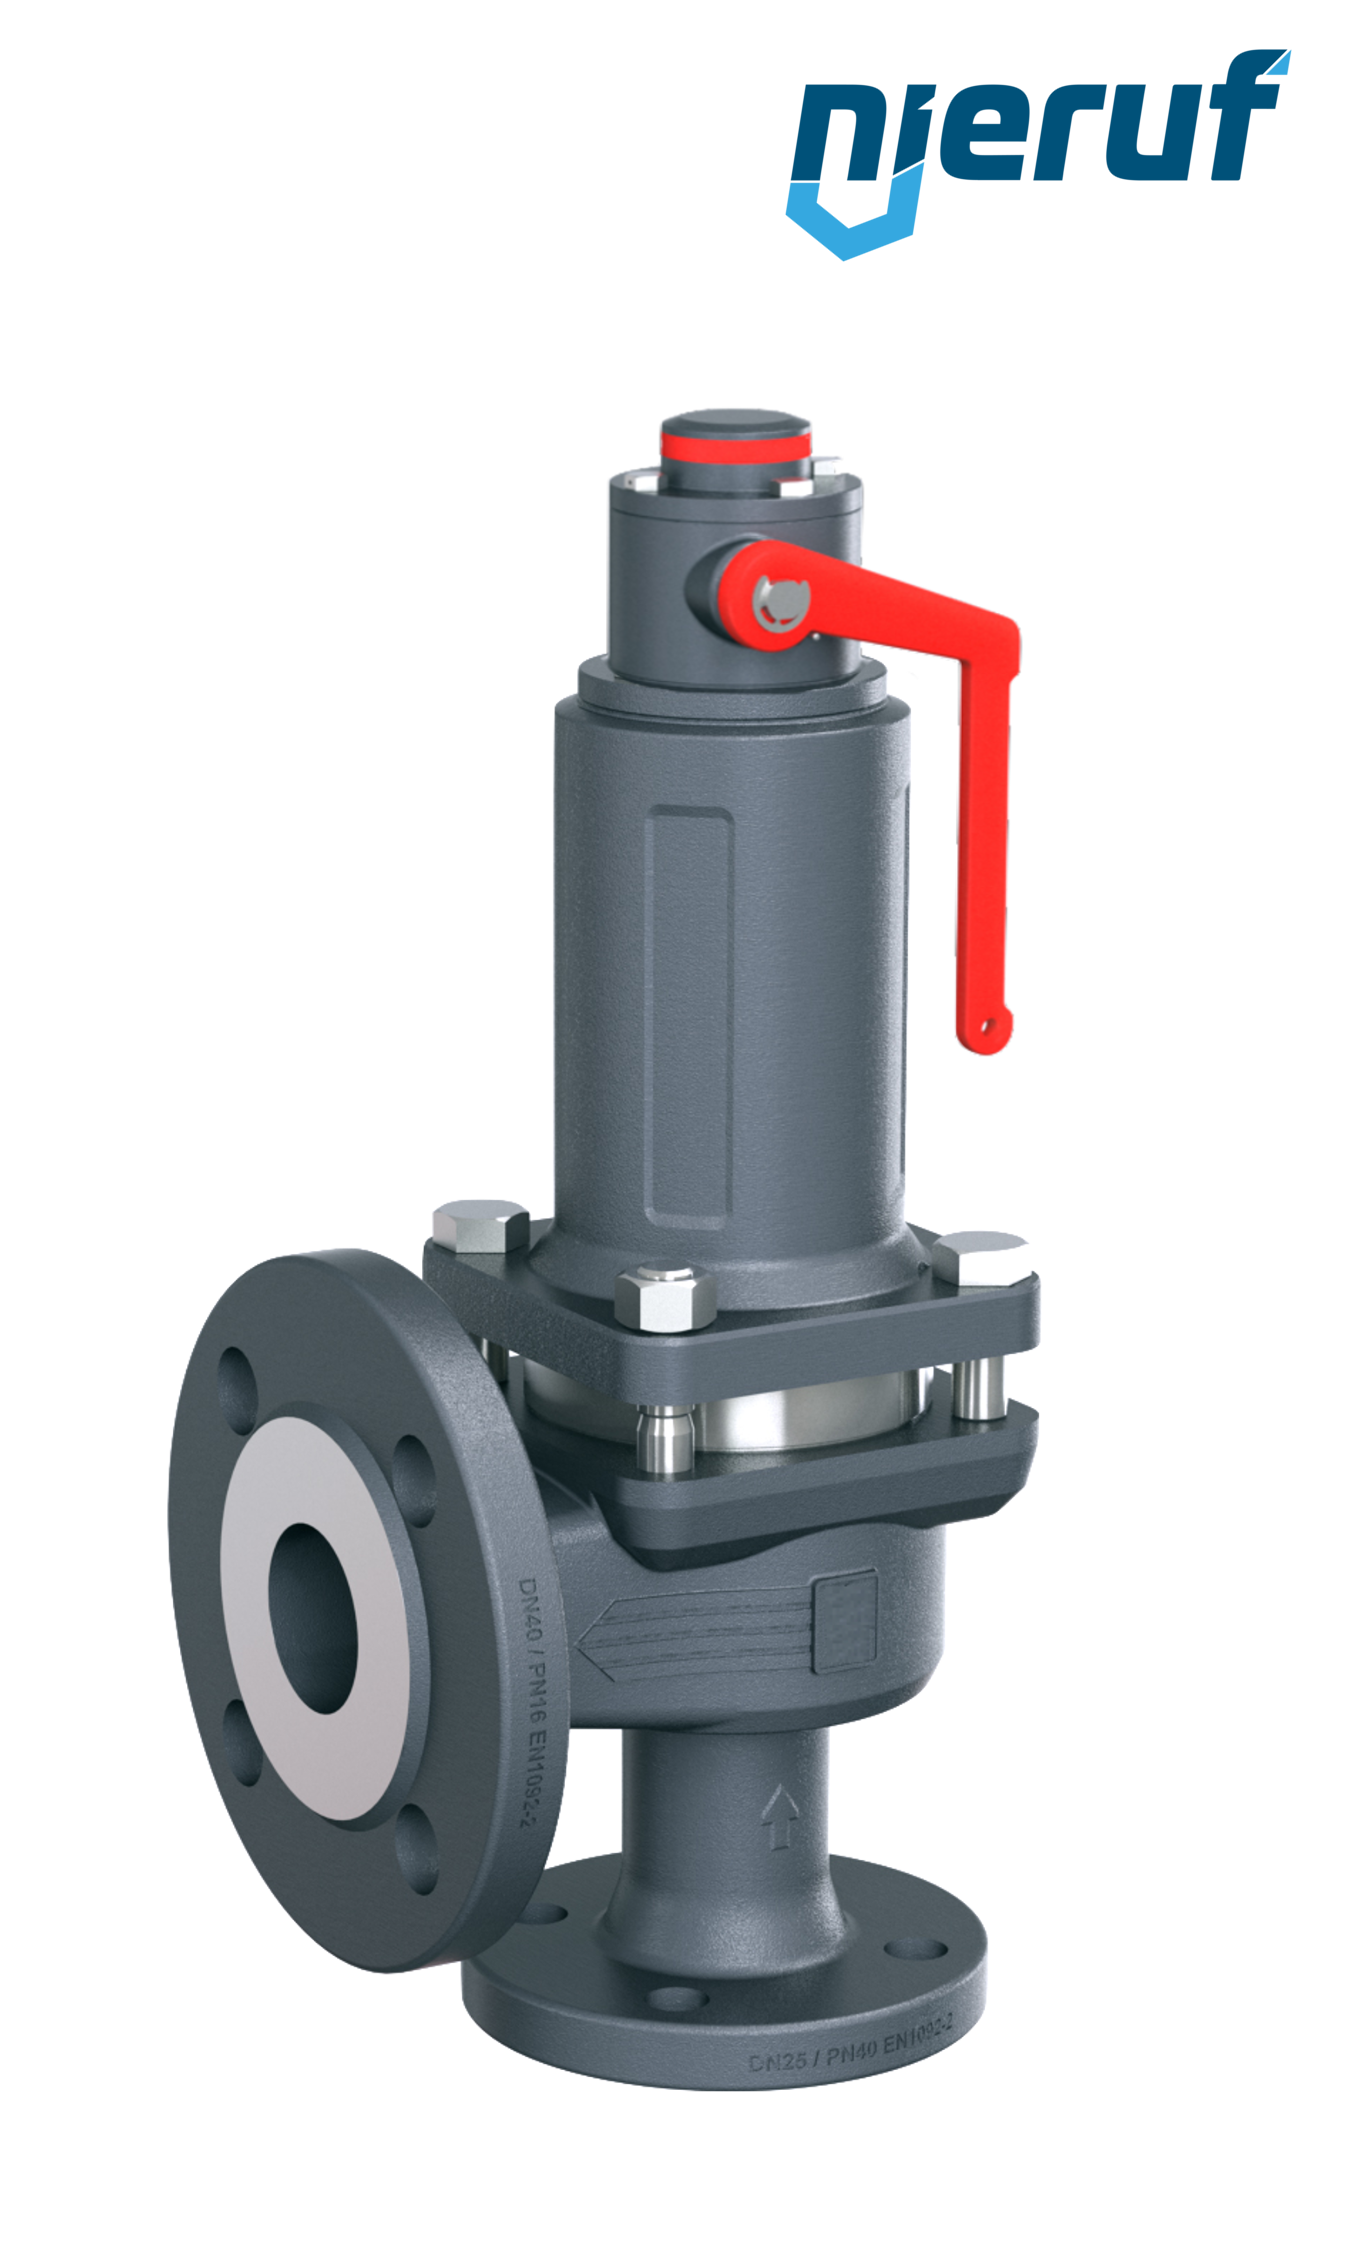 flange-safety valve DN100/DN150 SF06, gastight bonnet EPDM, with lifting device lever